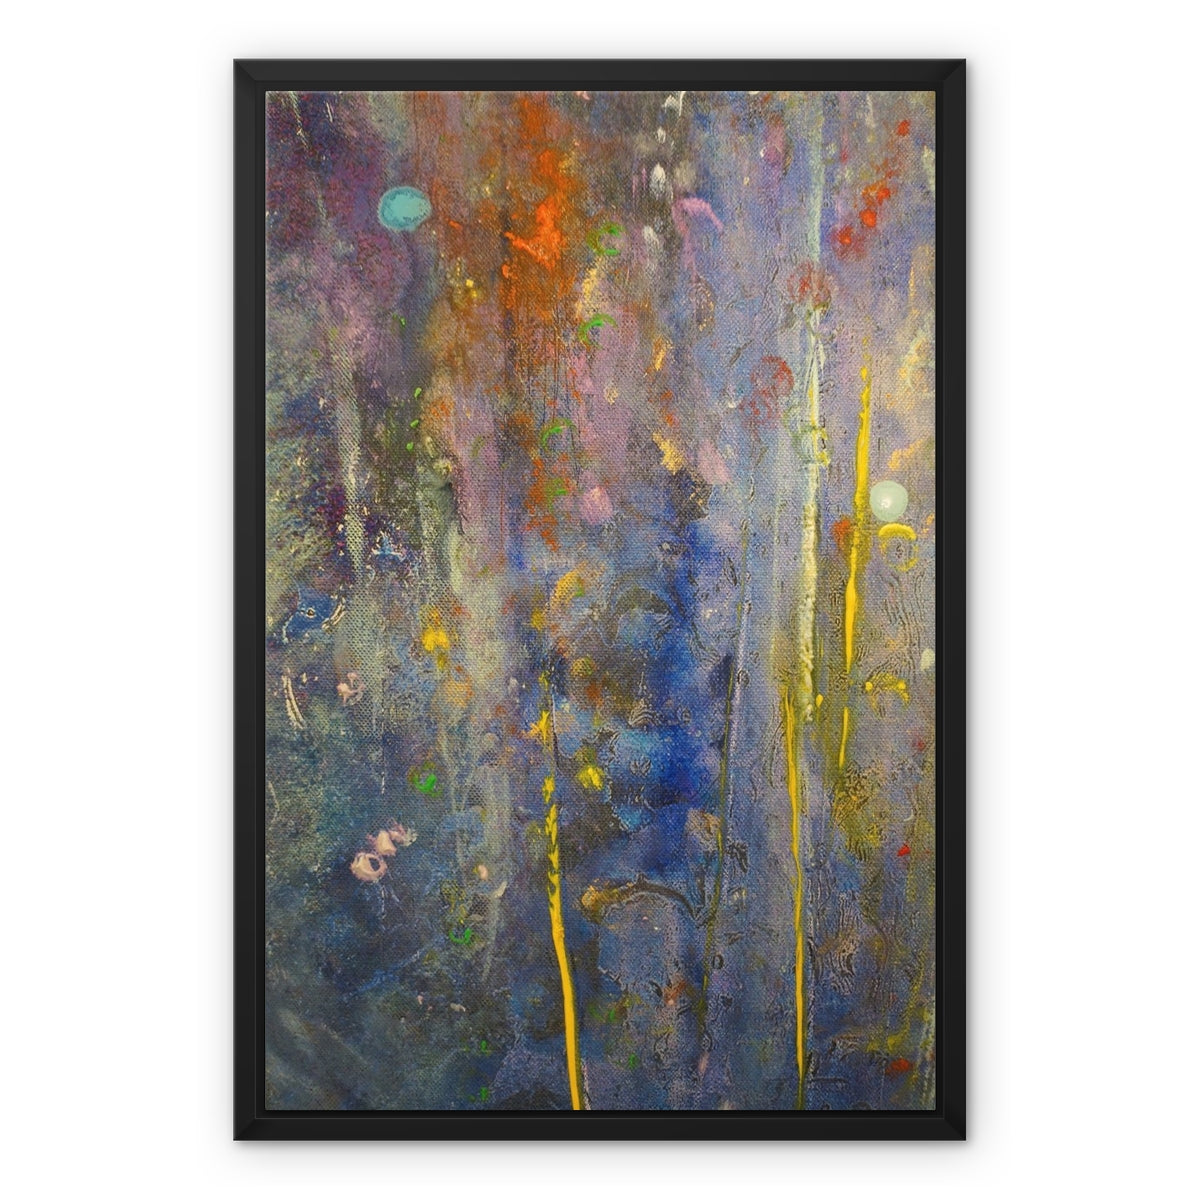 Cairngorms Waterfall Abstract Painting | Framed Canvas From Scotland-Floating Framed Canvas Prints-Abstract & Impressionistic Art Gallery-18"x24"-Paintings, Prints, Homeware, Art Gifts From Scotland By Scottish Artist Kevin Hunter